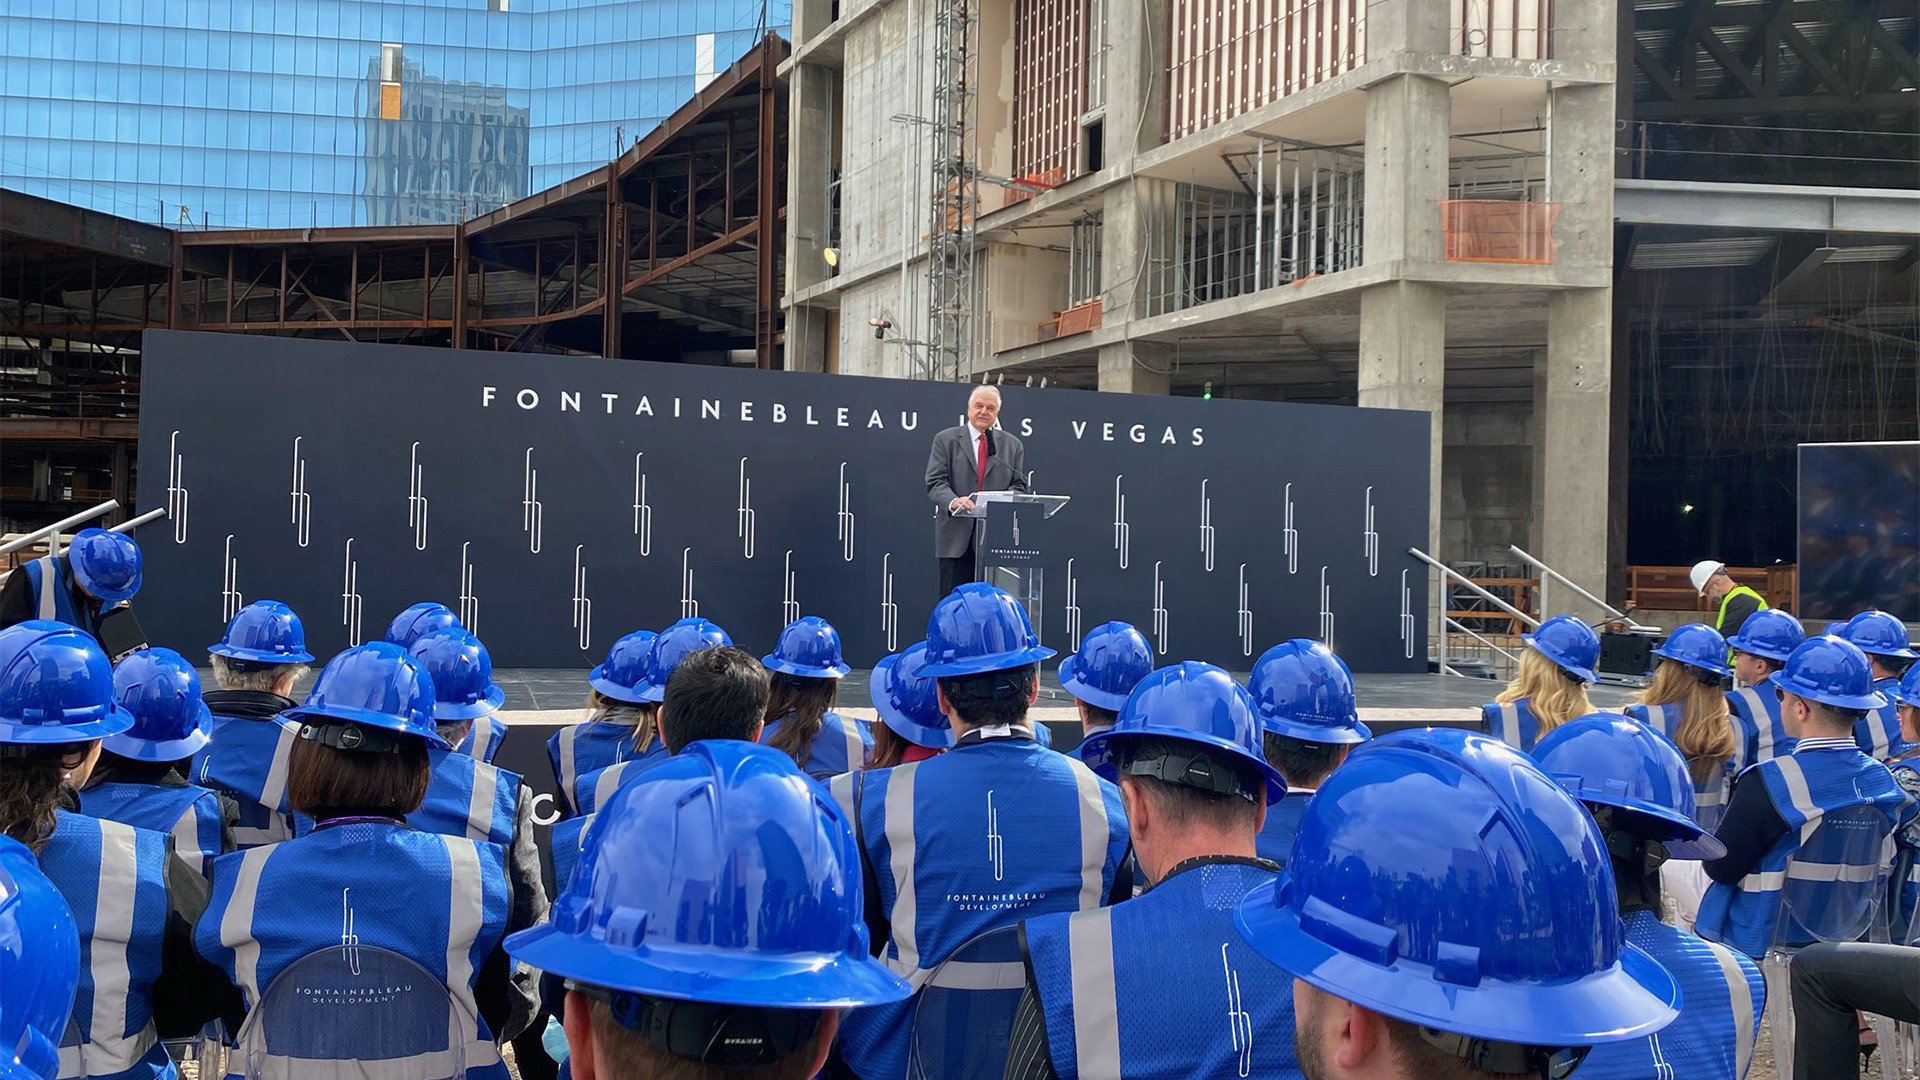 Fontainebleau Las Vegas names CEO; projected to open late 2023